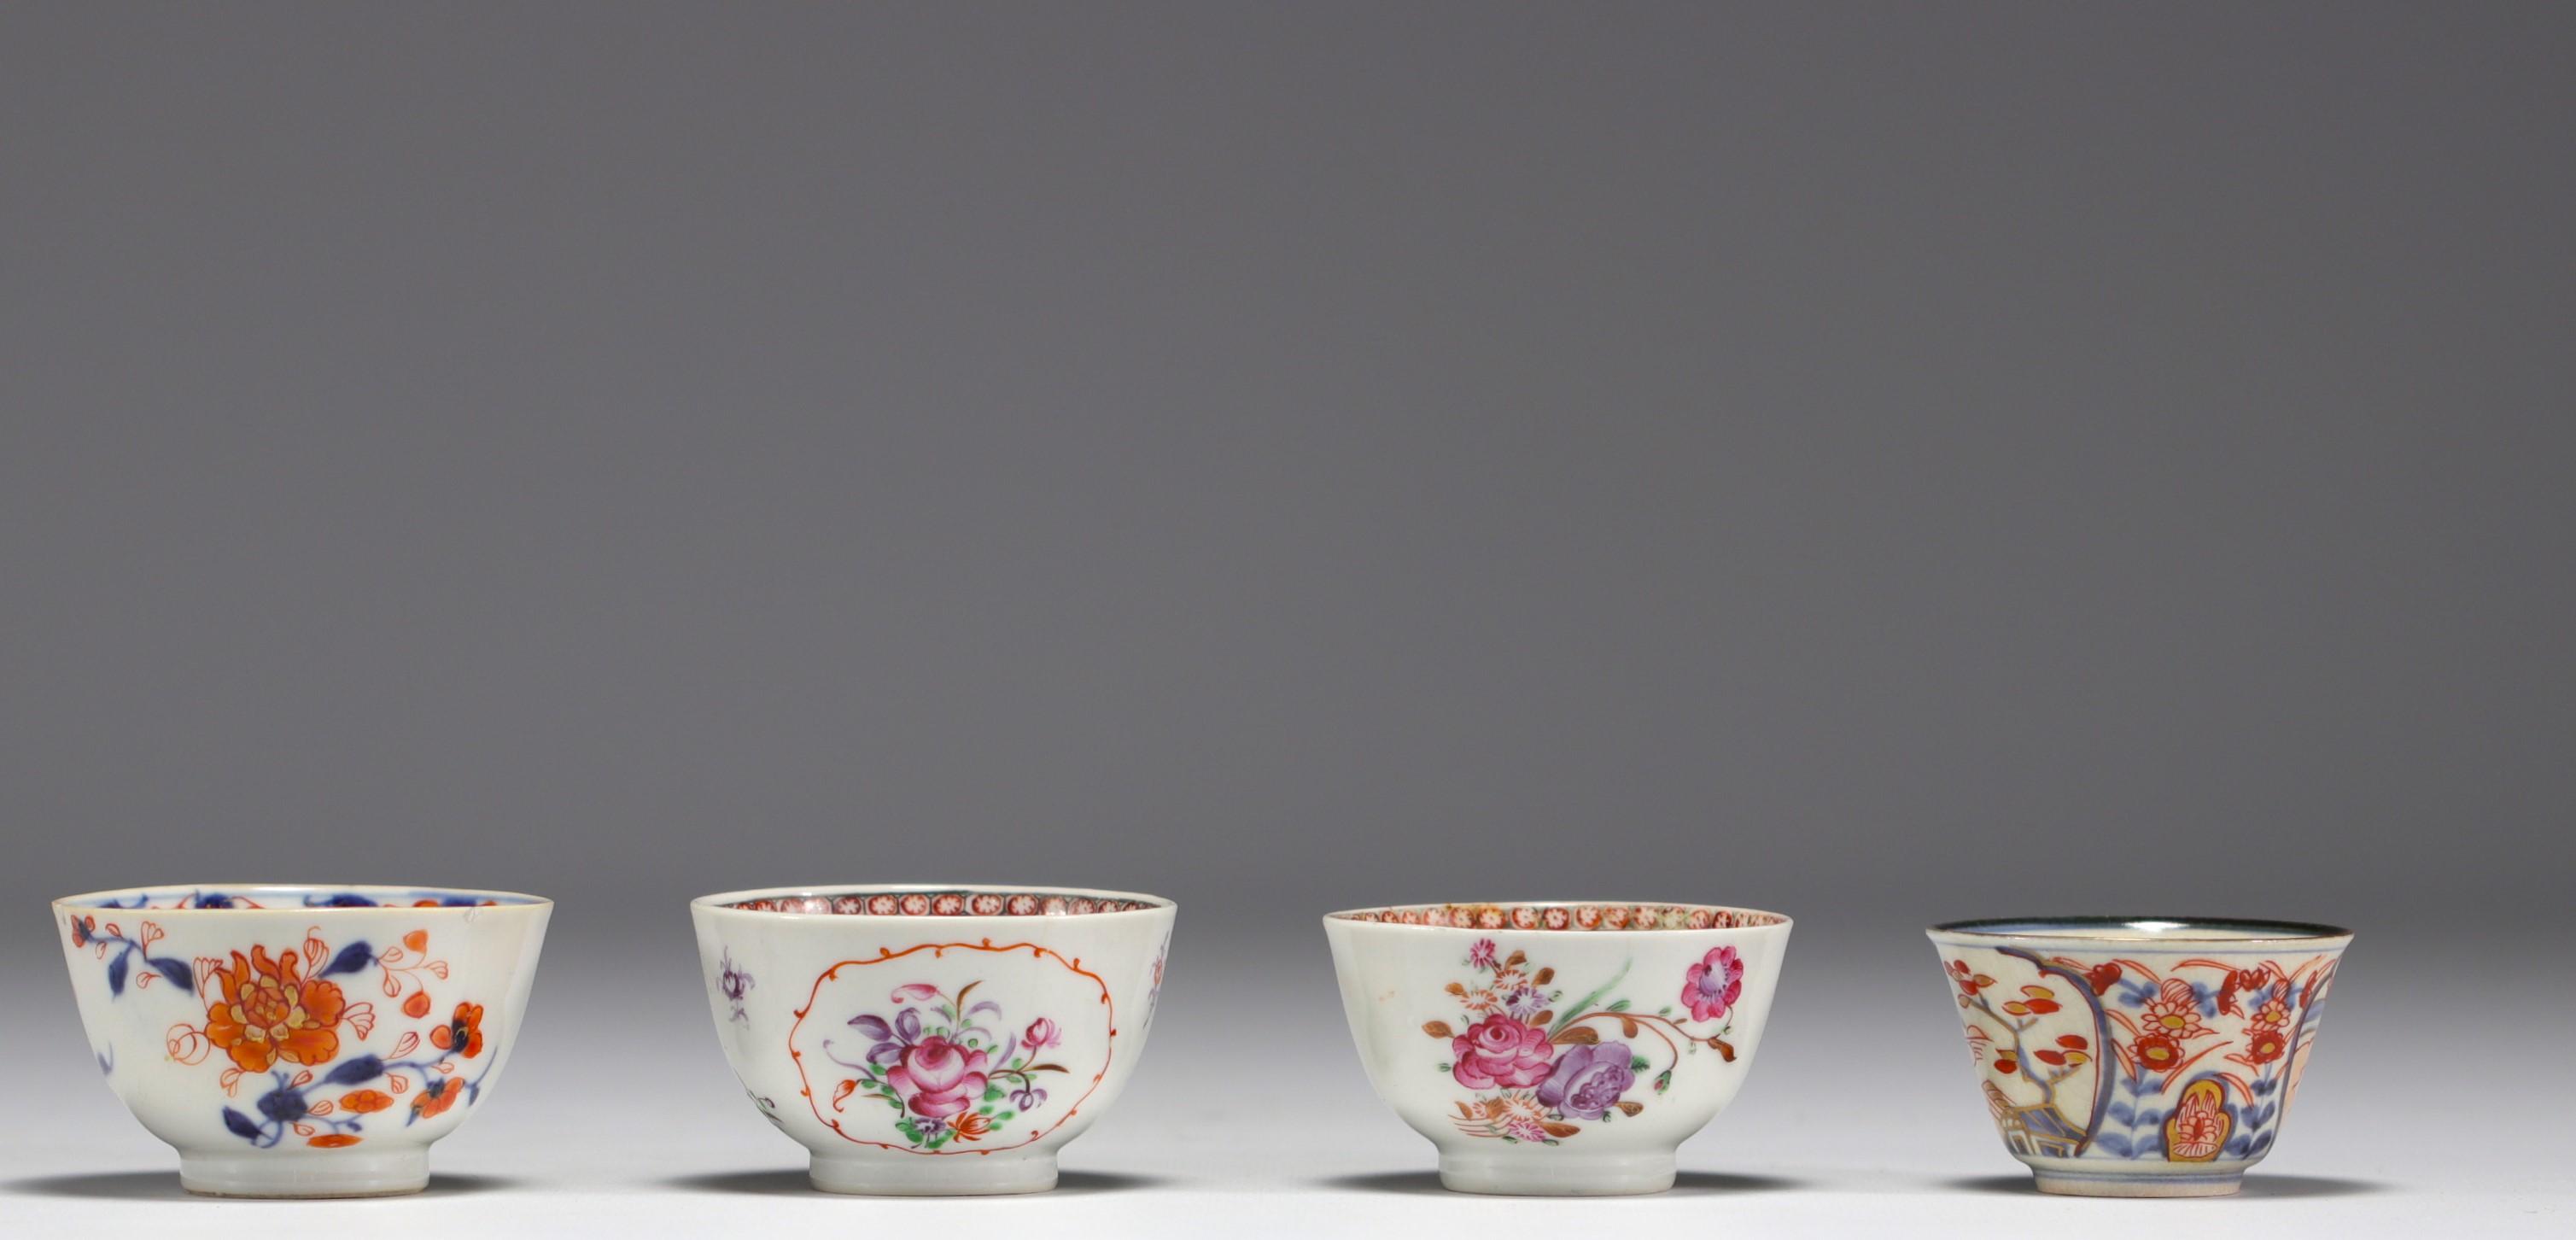 China - Set of various pieces of polychrome porcelain, 18th century. - Image 2 of 4